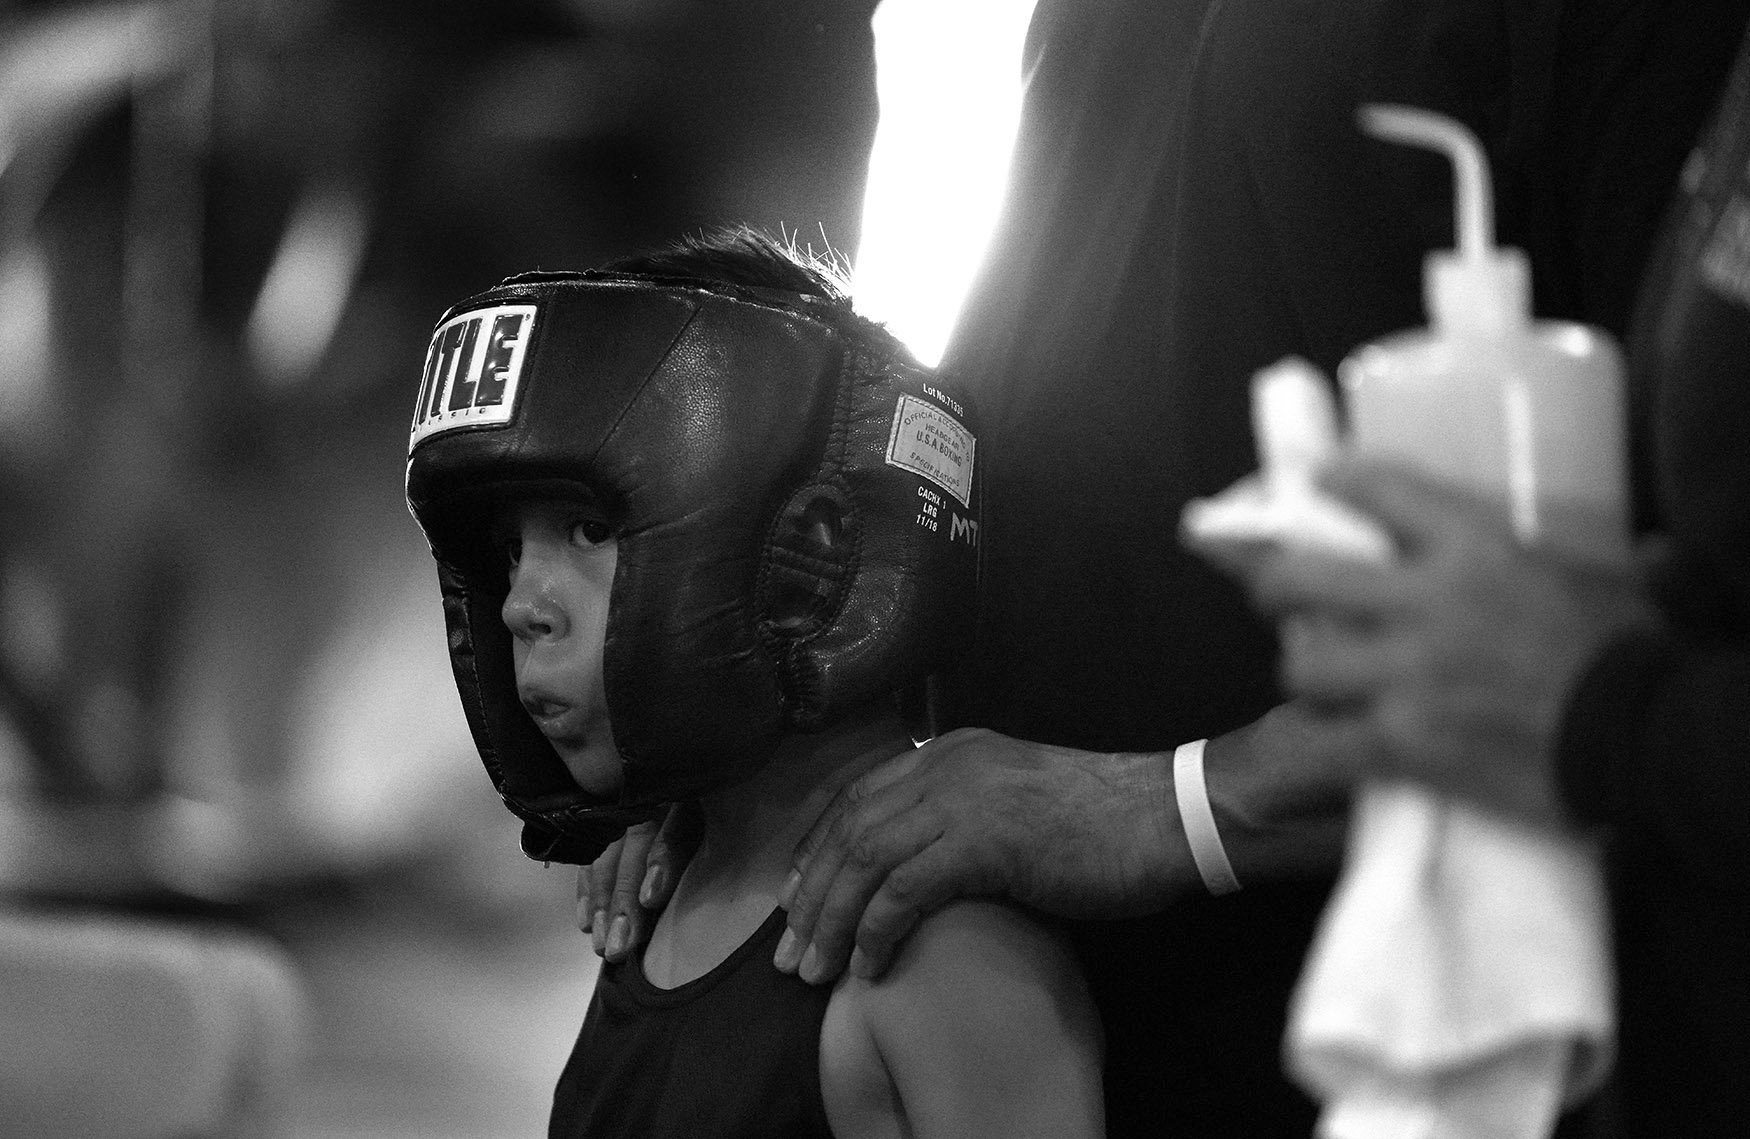  Nine year-old Daniel Ramies waits for his bout during the annual amateur boxing show staged by the Duarte Boxing Club at Duarte High School in Duarte on Saturday, August 13, 2022.  